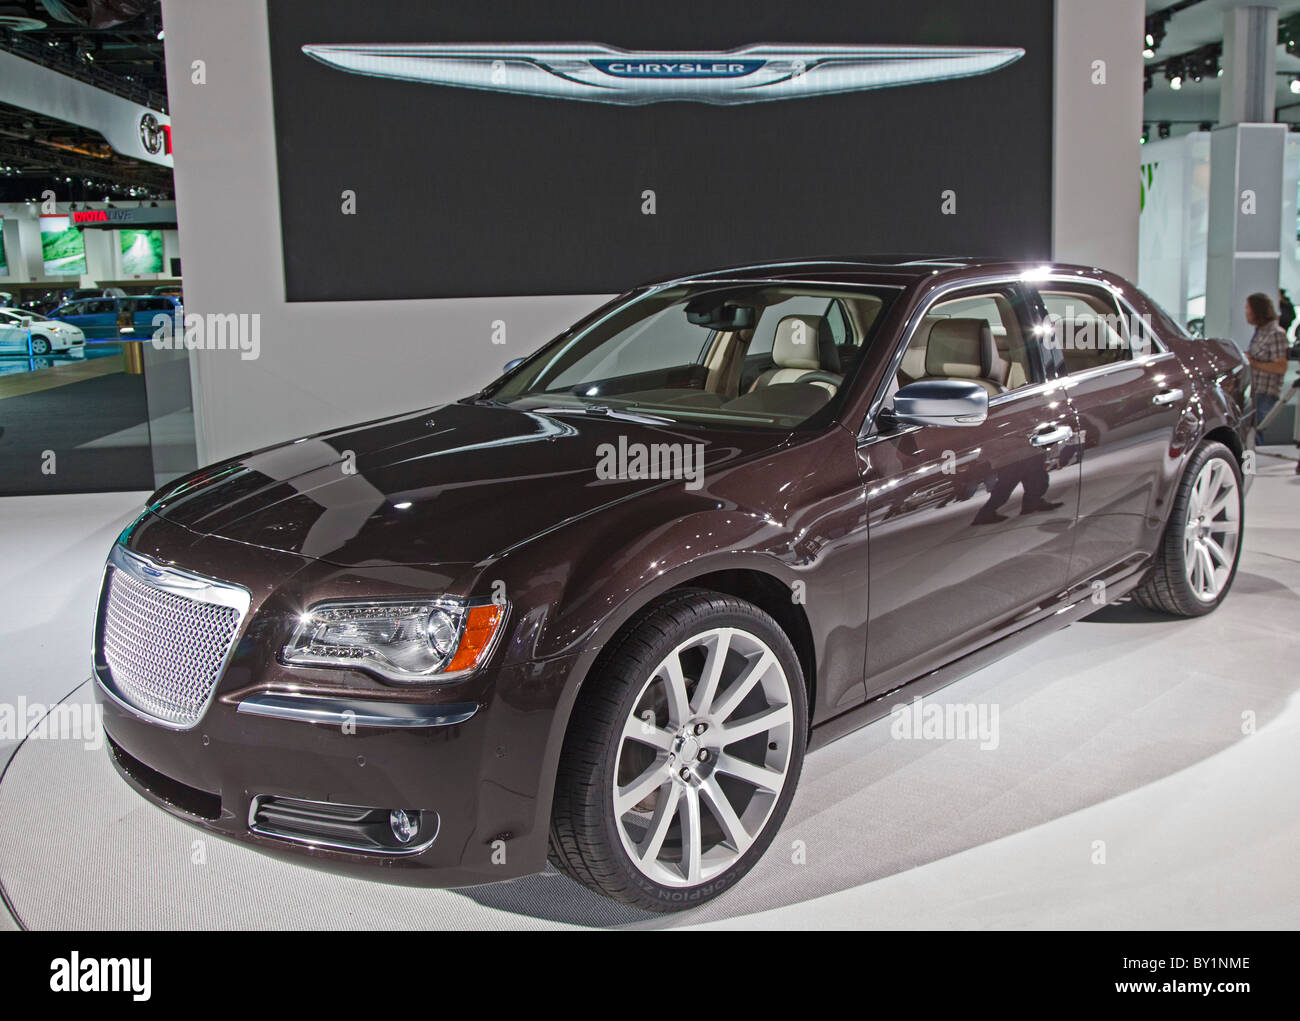 Detroit, Michigan - The 2011 Chrysler 300 on display at the North American International Auto Show. Stock Photo